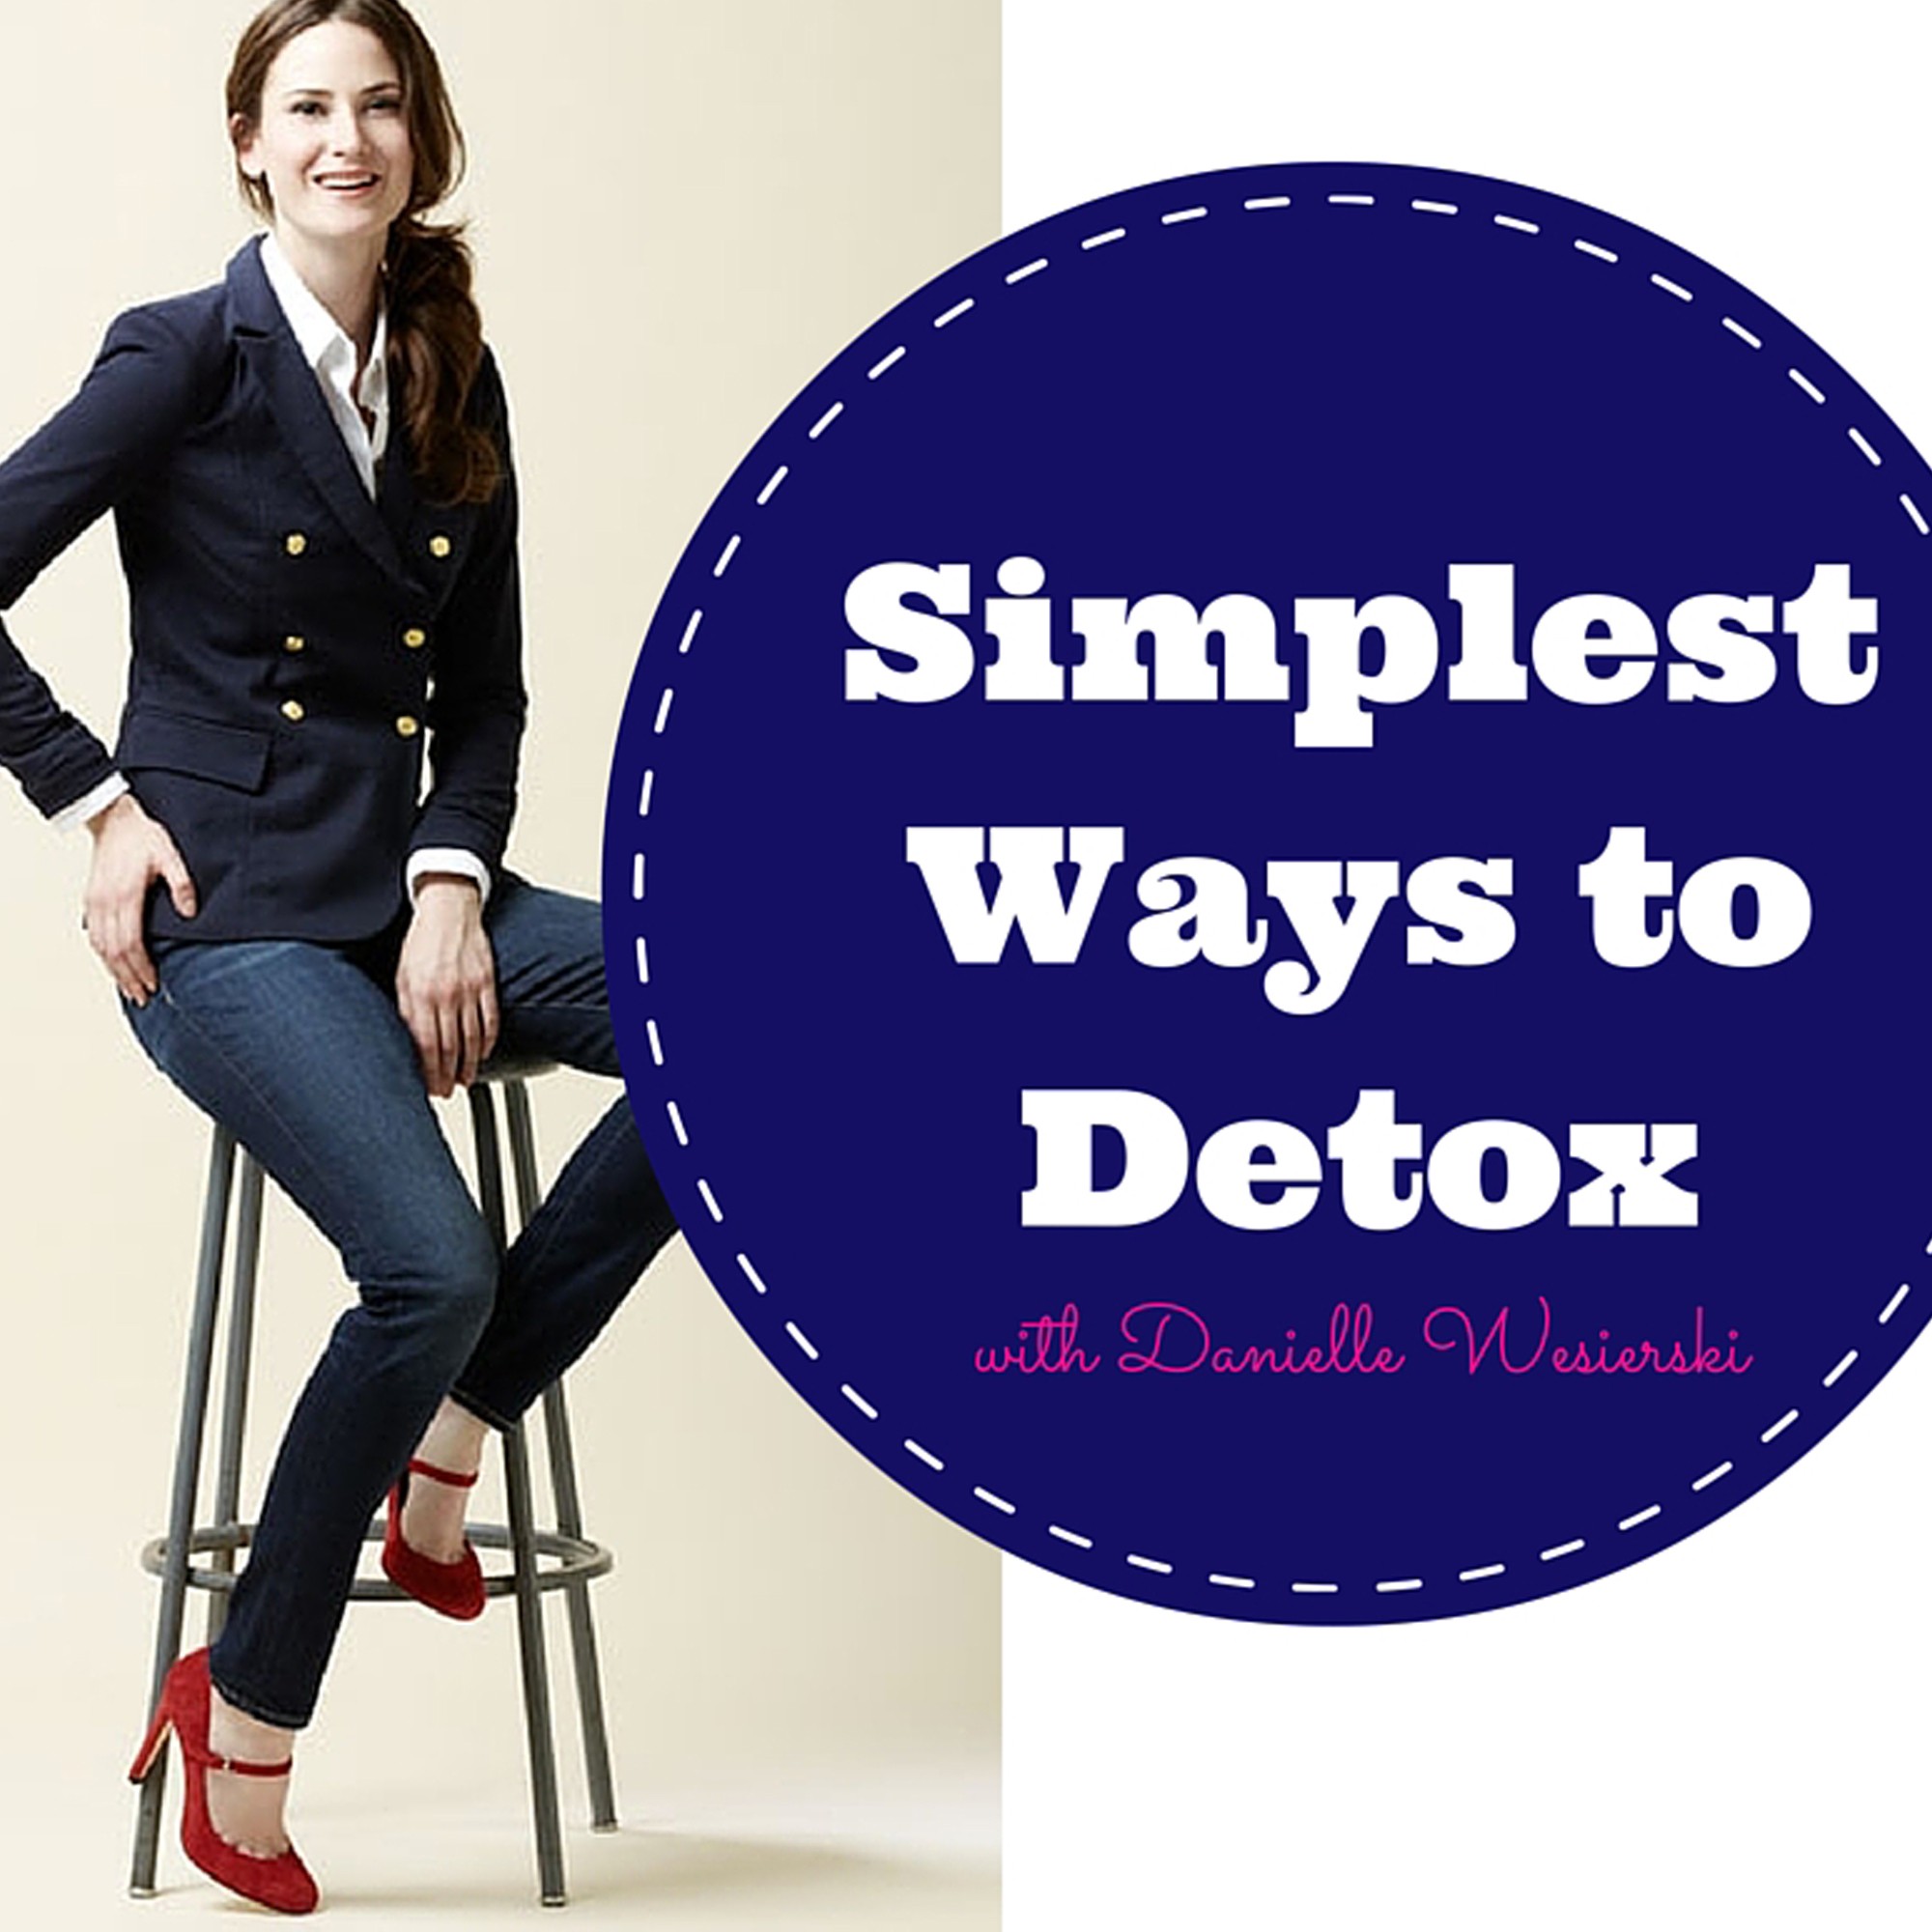 Simplest Ways to Detox with Danielle Wesierski image from http://goodnessme.ca/C20105-parent.jpg